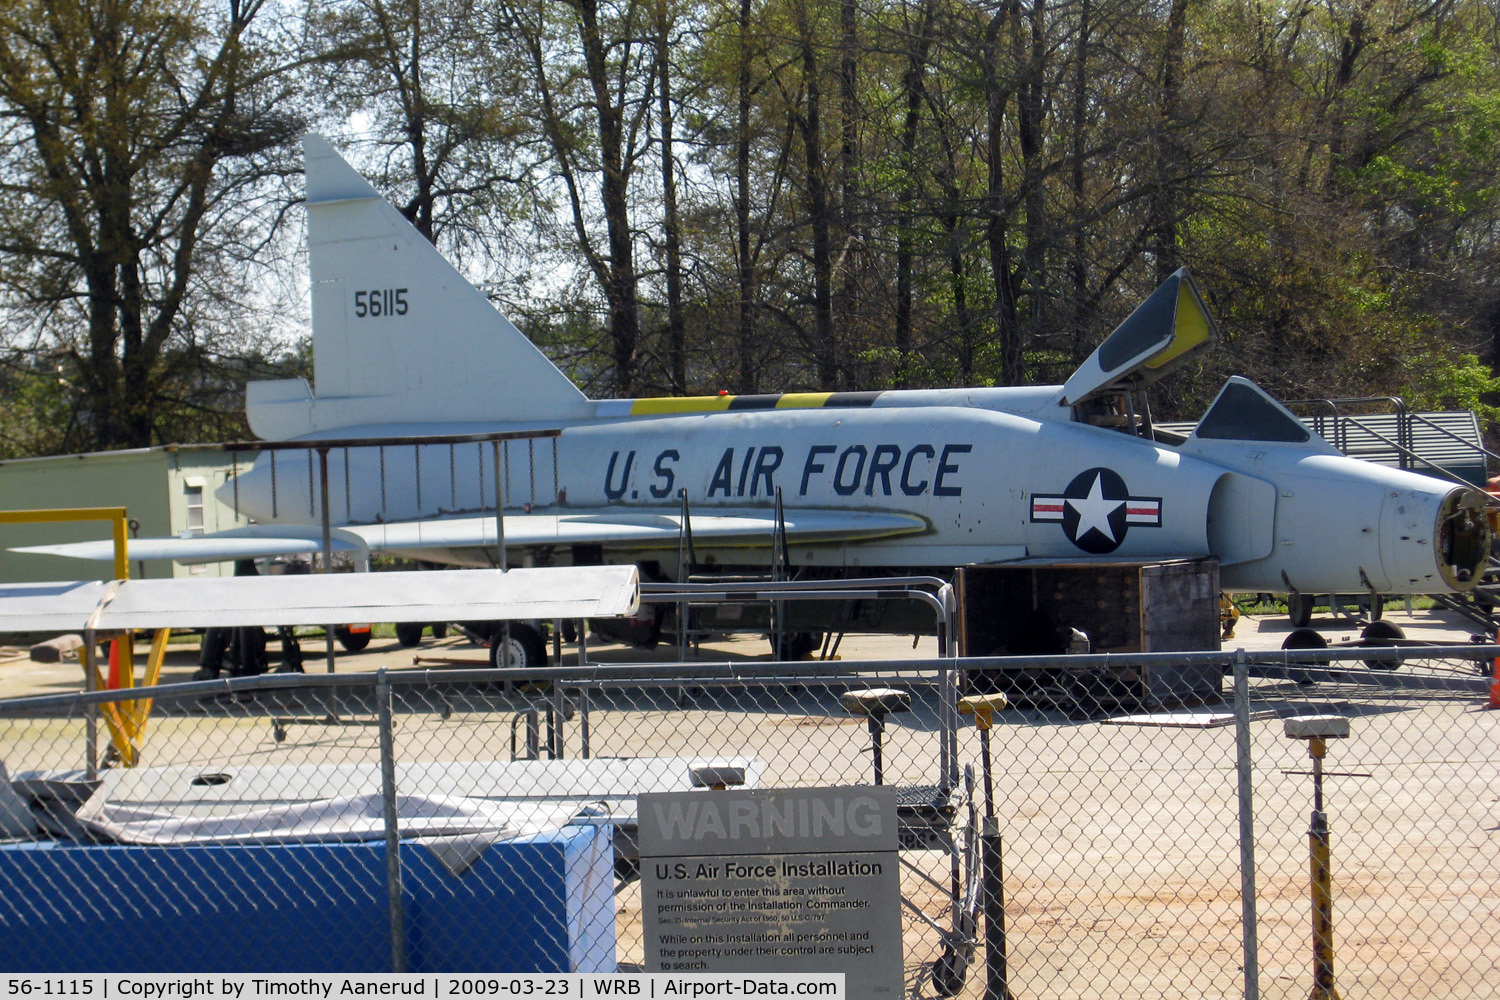 56-1115, Convair F-102A Delta Dagger C/N 8-10-332, F-102 in restoration area at Museum of Aviation, Robins AFB